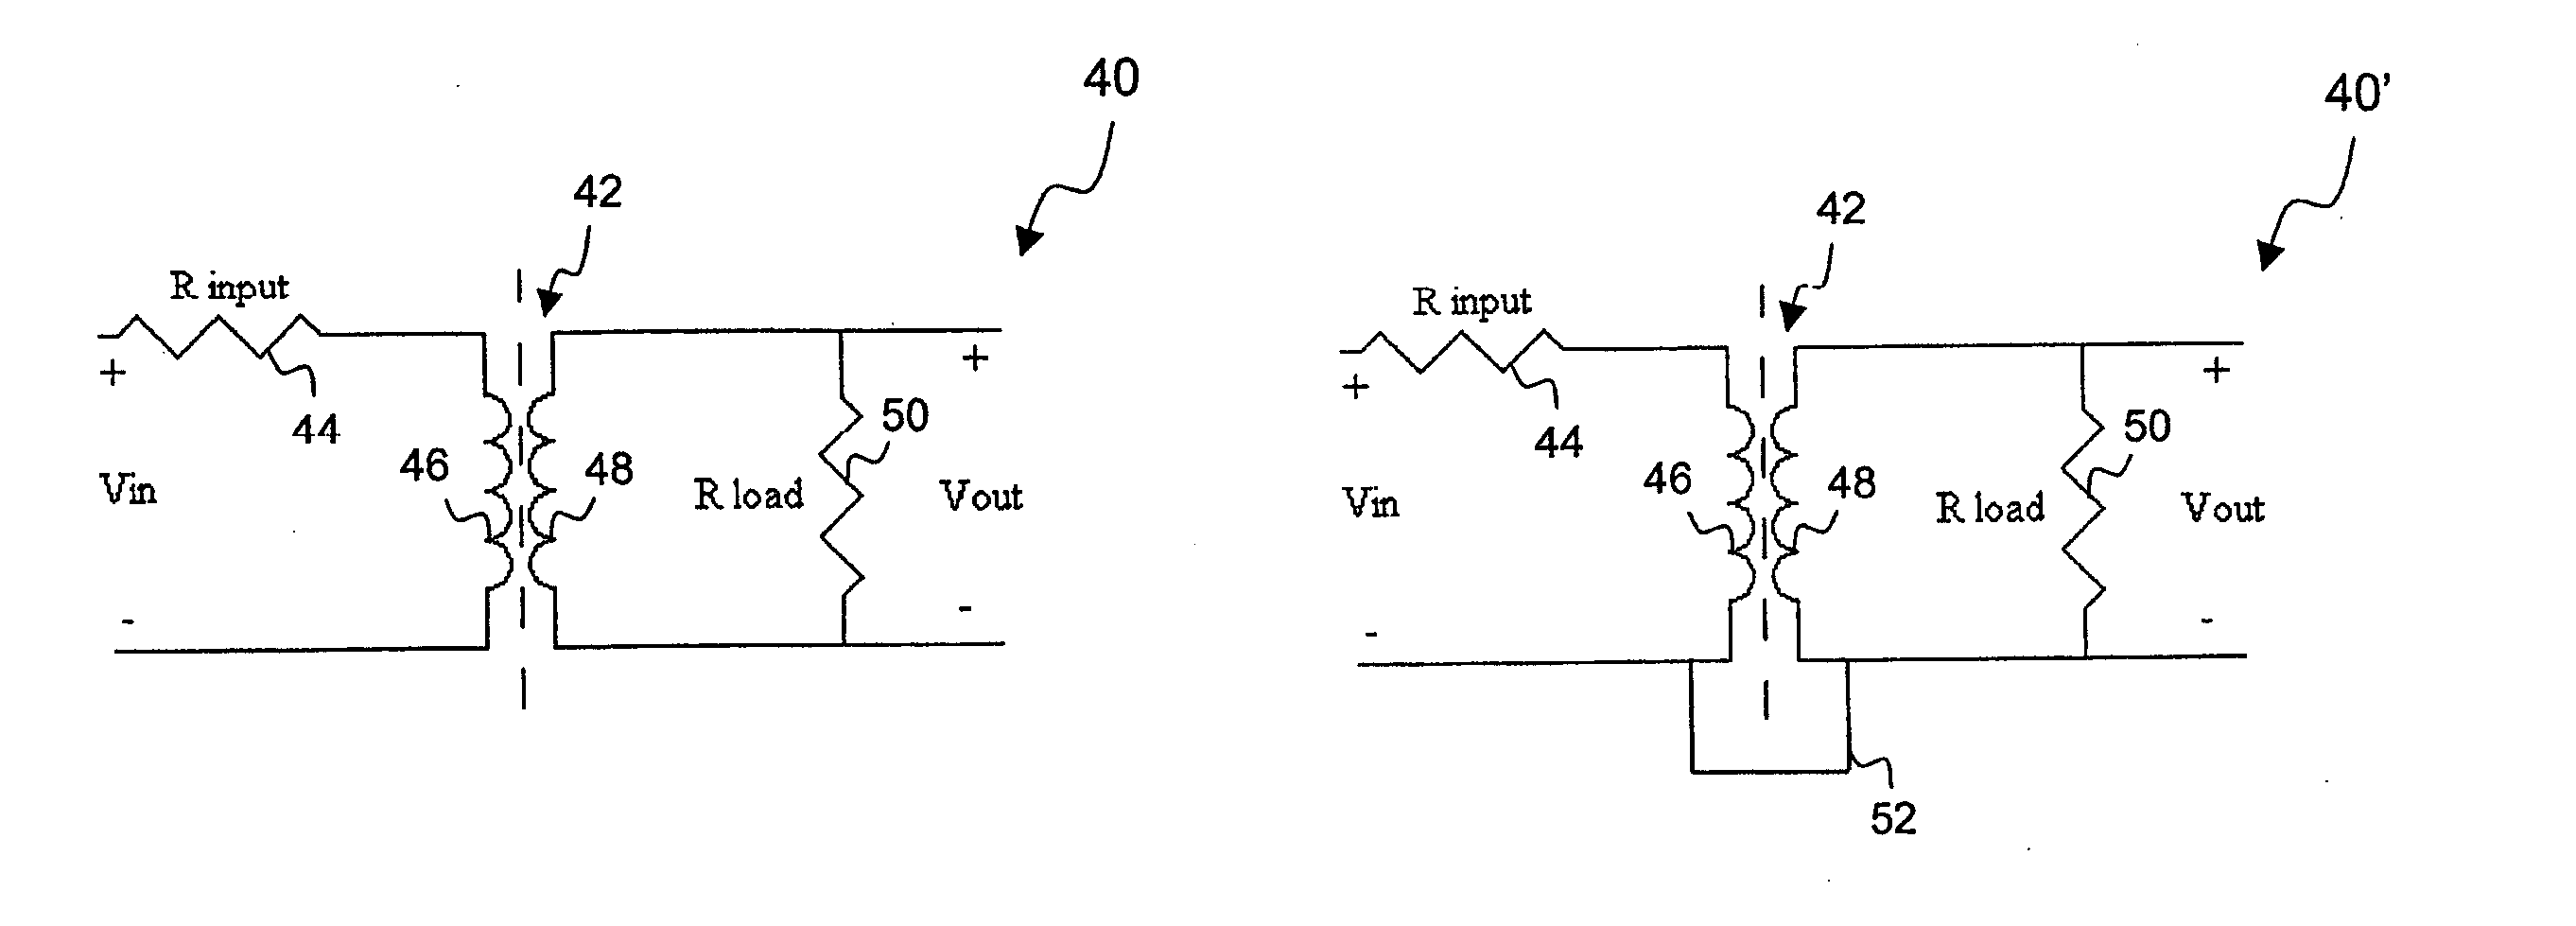 System and method for acquiring voltages and measuring voltage into an electrical service using a non-active current transformer